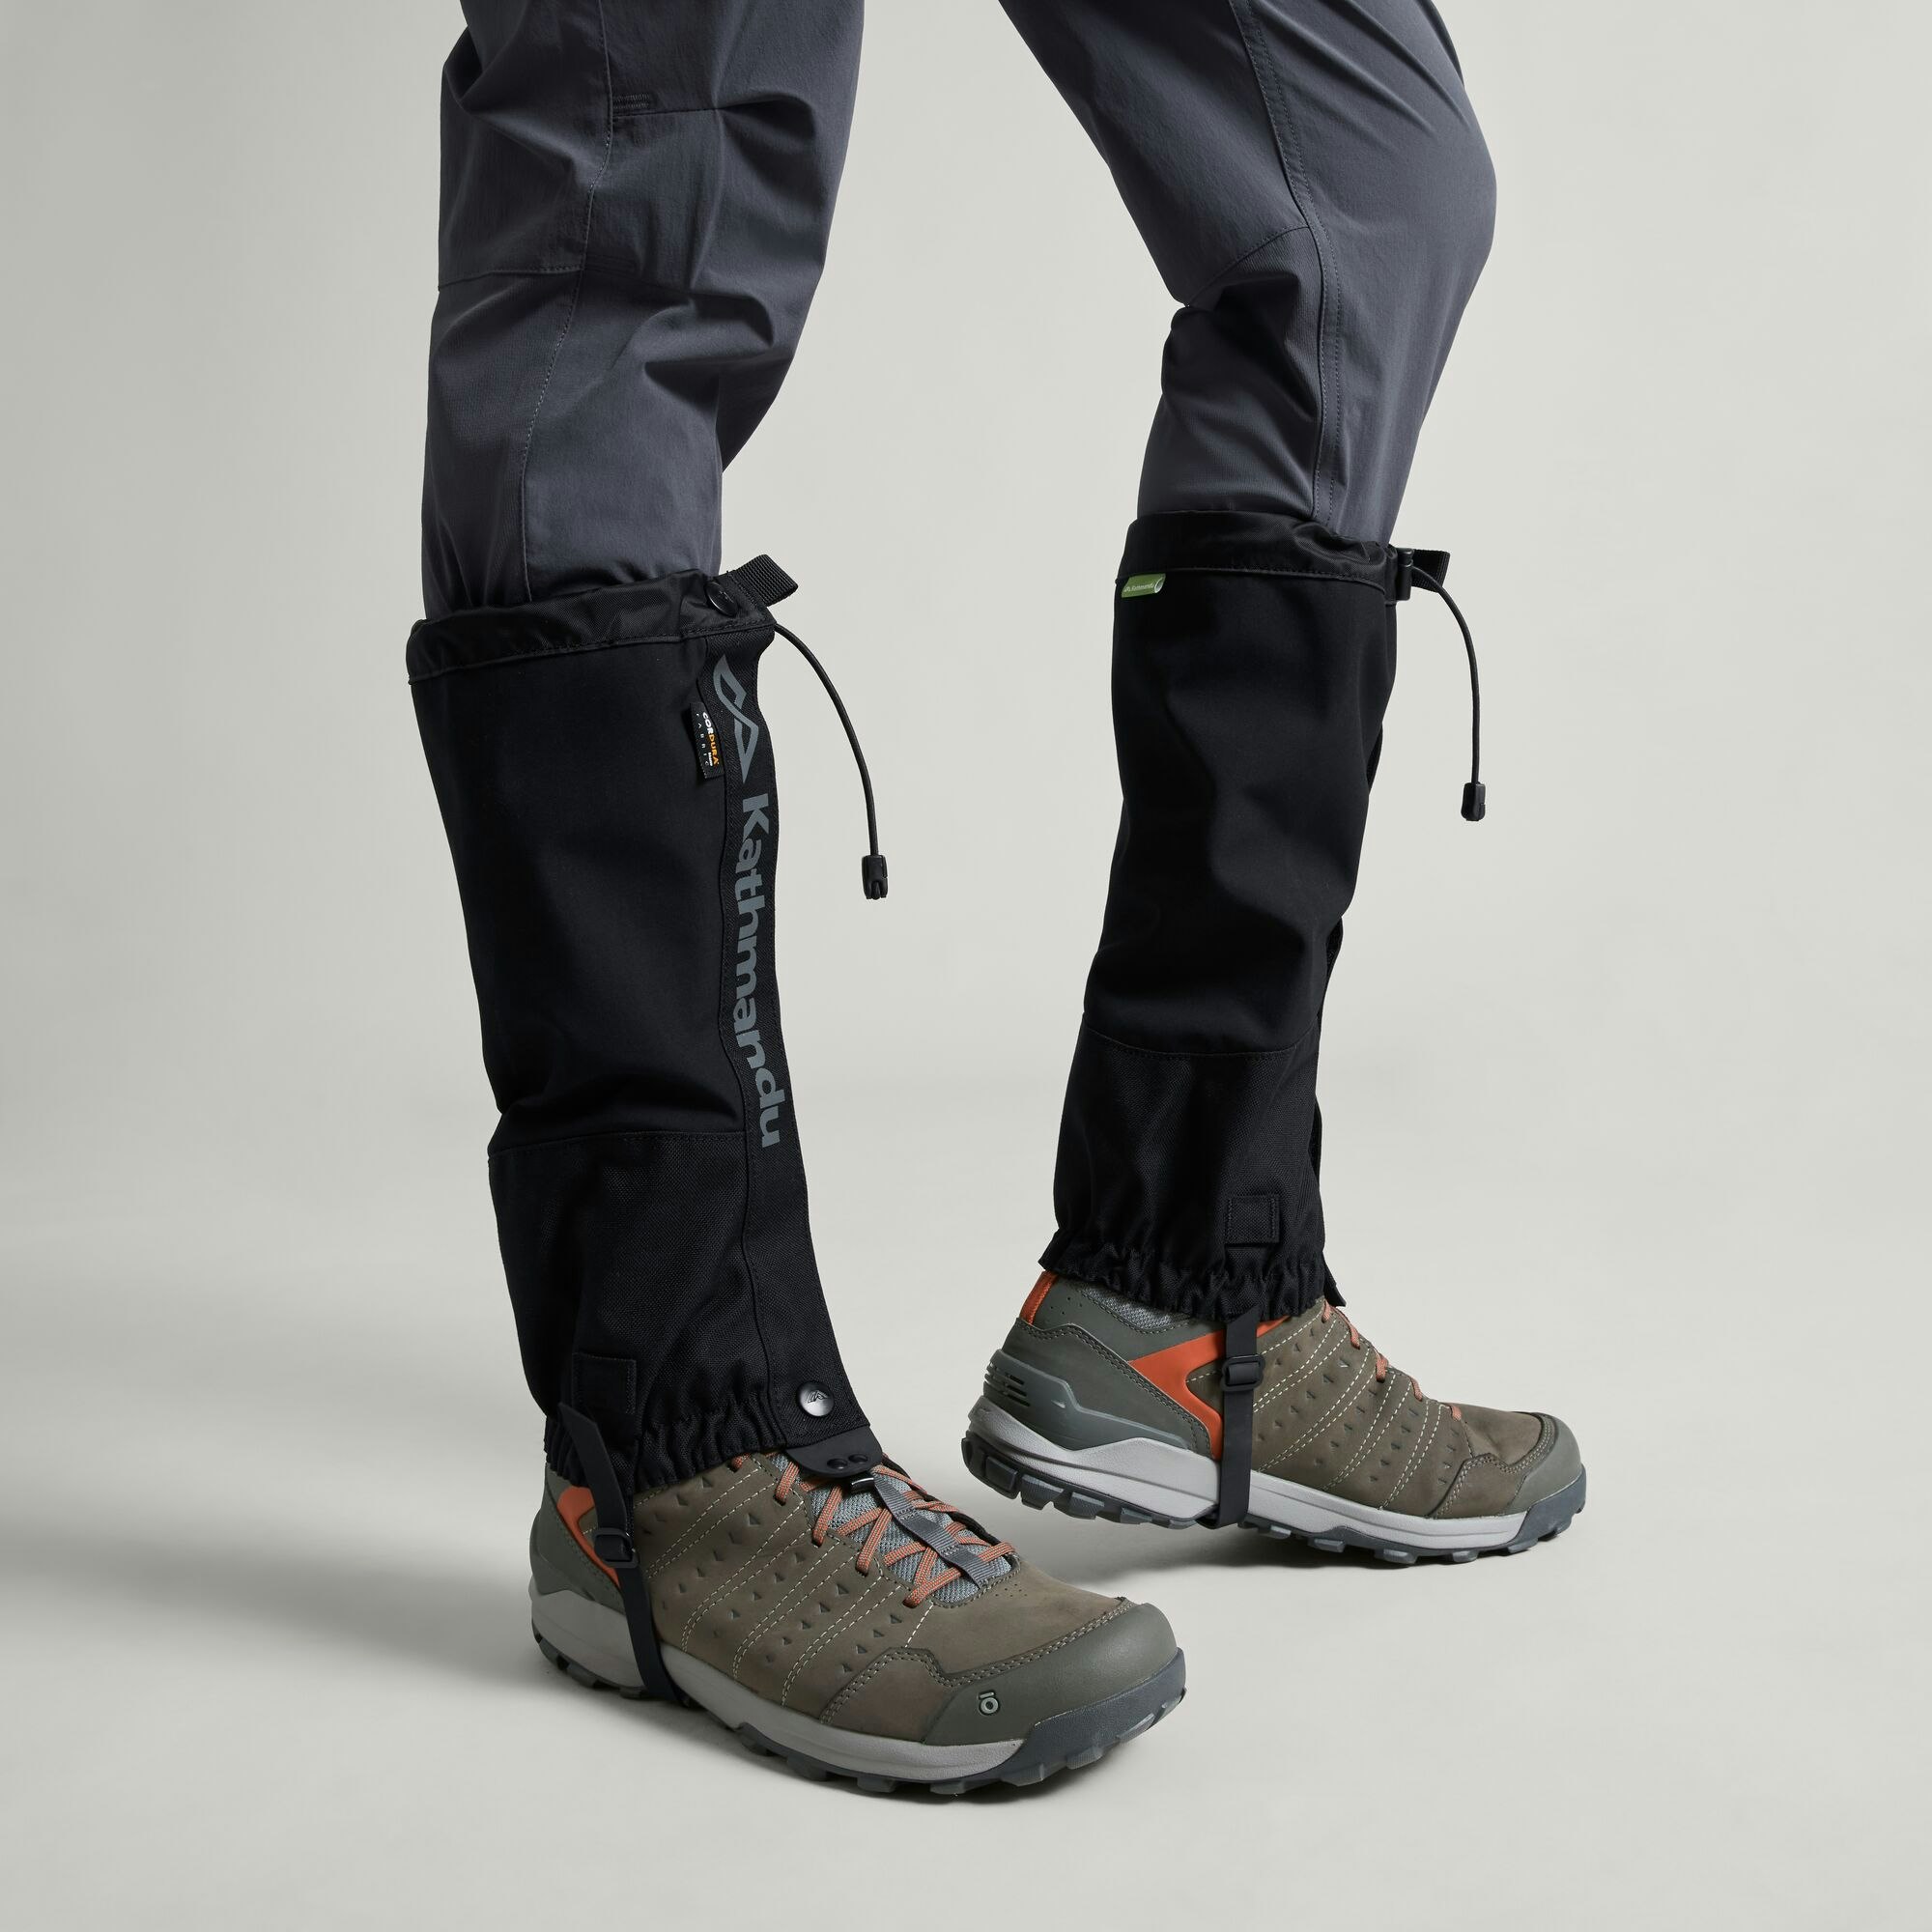 Sleeping Indian Wool - From marshy, wet ground to deep snow, our  Ridgerunner gaiters keep your pants dry and your feet warm. On top of that,  gaiters protect from drafts and extend